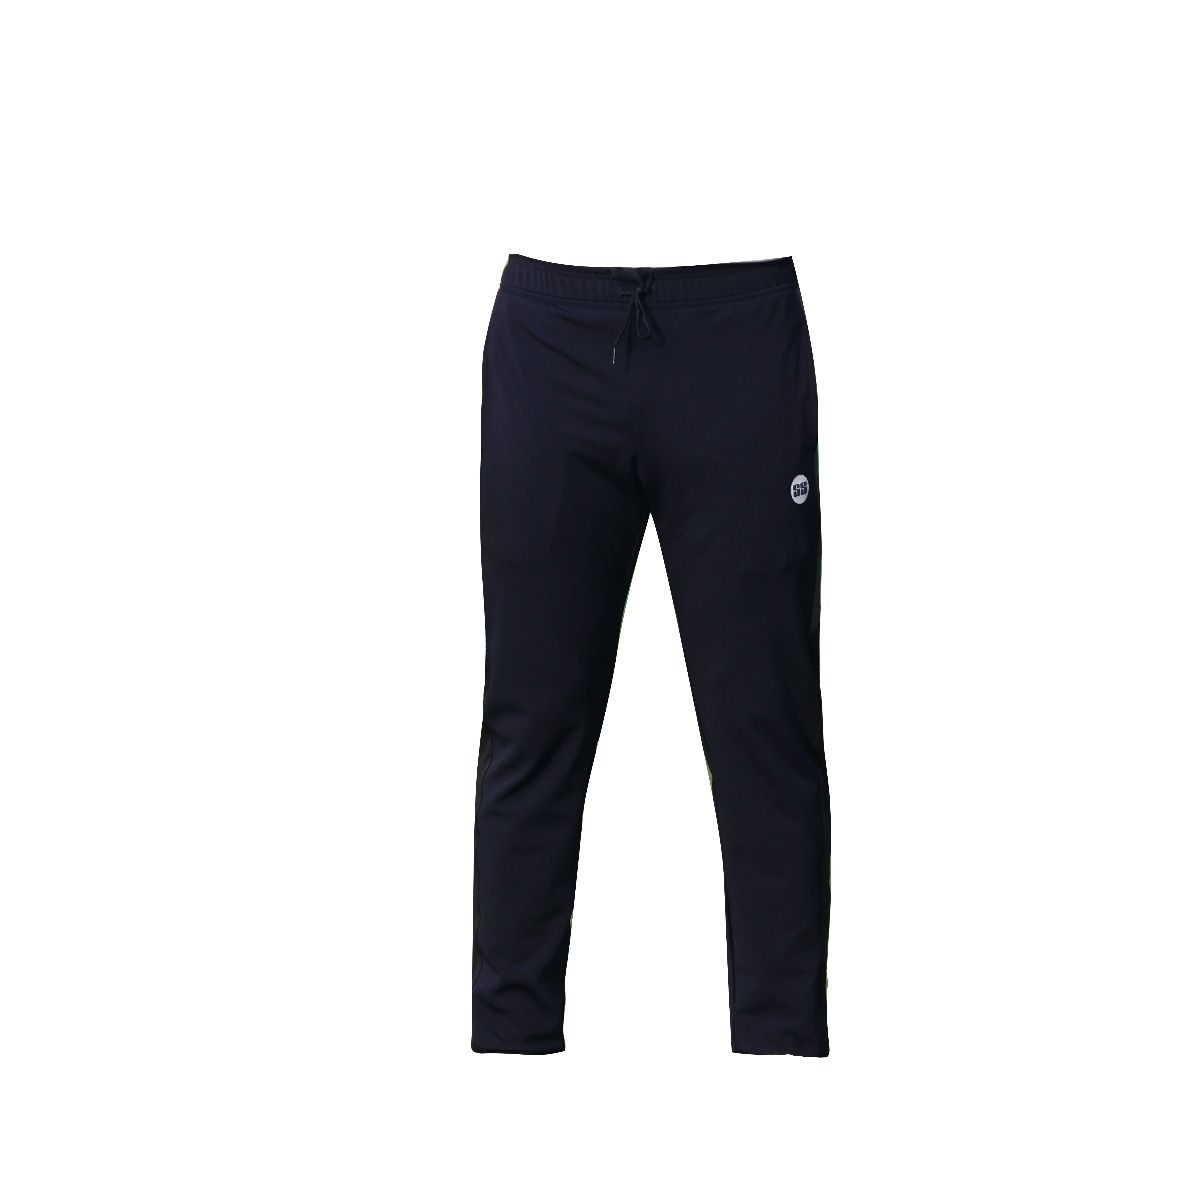 SS White Premium Pant for Men and Boys - SS Cricket